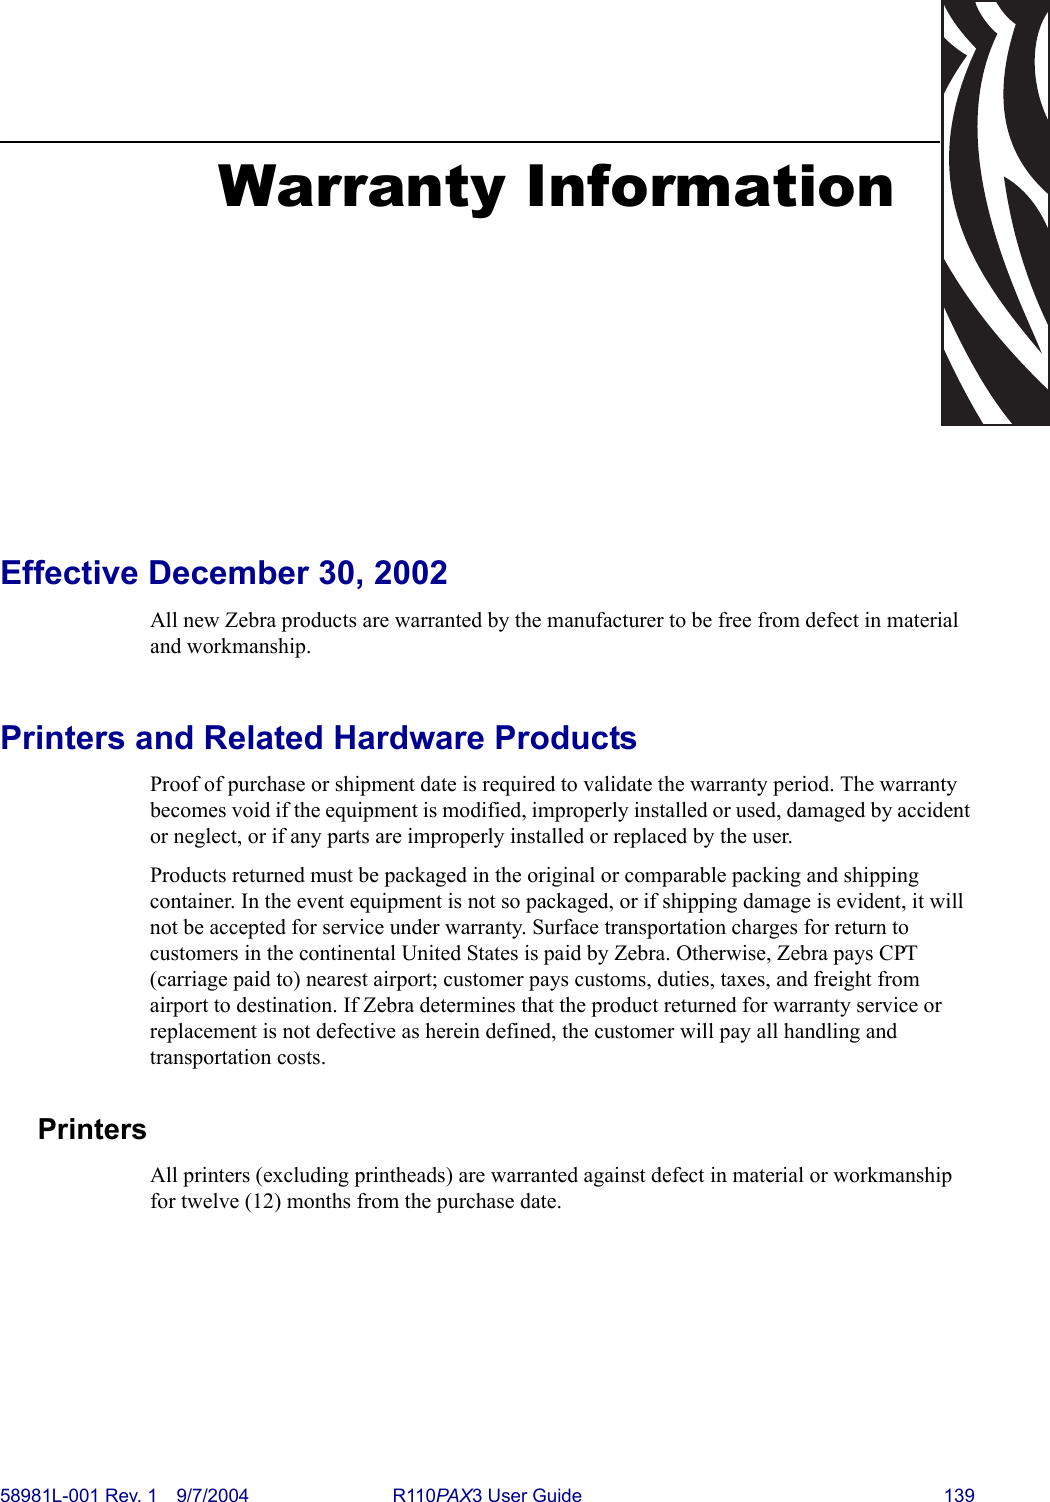 58981L-001 Rev. 1 9/7/2004 R110PAX3 User Guide 139Warranty InformationEffective December 30, 2002All new Zebra products are warranted by the manufacturer to be free from defect in material and workmanship. Printers and Related Hardware ProductsProof of purchase or shipment date is required to validate the warranty period. The warranty becomes void if the equipment is modified, improperly installed or used, damaged by accident or neglect, or if any parts are improperly installed or replaced by the user.Products returned must be packaged in the original or comparable packing and shipping container. In the event equipment is not so packaged, or if shipping damage is evident, it will not be accepted for service under warranty. Surface transportation charges for return to customers in the continental United States is paid by Zebra. Otherwise, Zebra pays CPT (carriage paid to) nearest airport; customer pays customs, duties, taxes, and freight from airport to destination. If Zebra determines that the product returned for warranty service or replacement is not defective as herein defined, the customer will pay all handling and transportation costs.PrintersAll printers (excluding printheads) are warranted against defect in material or workmanship for twelve (12) months from the purchase date.